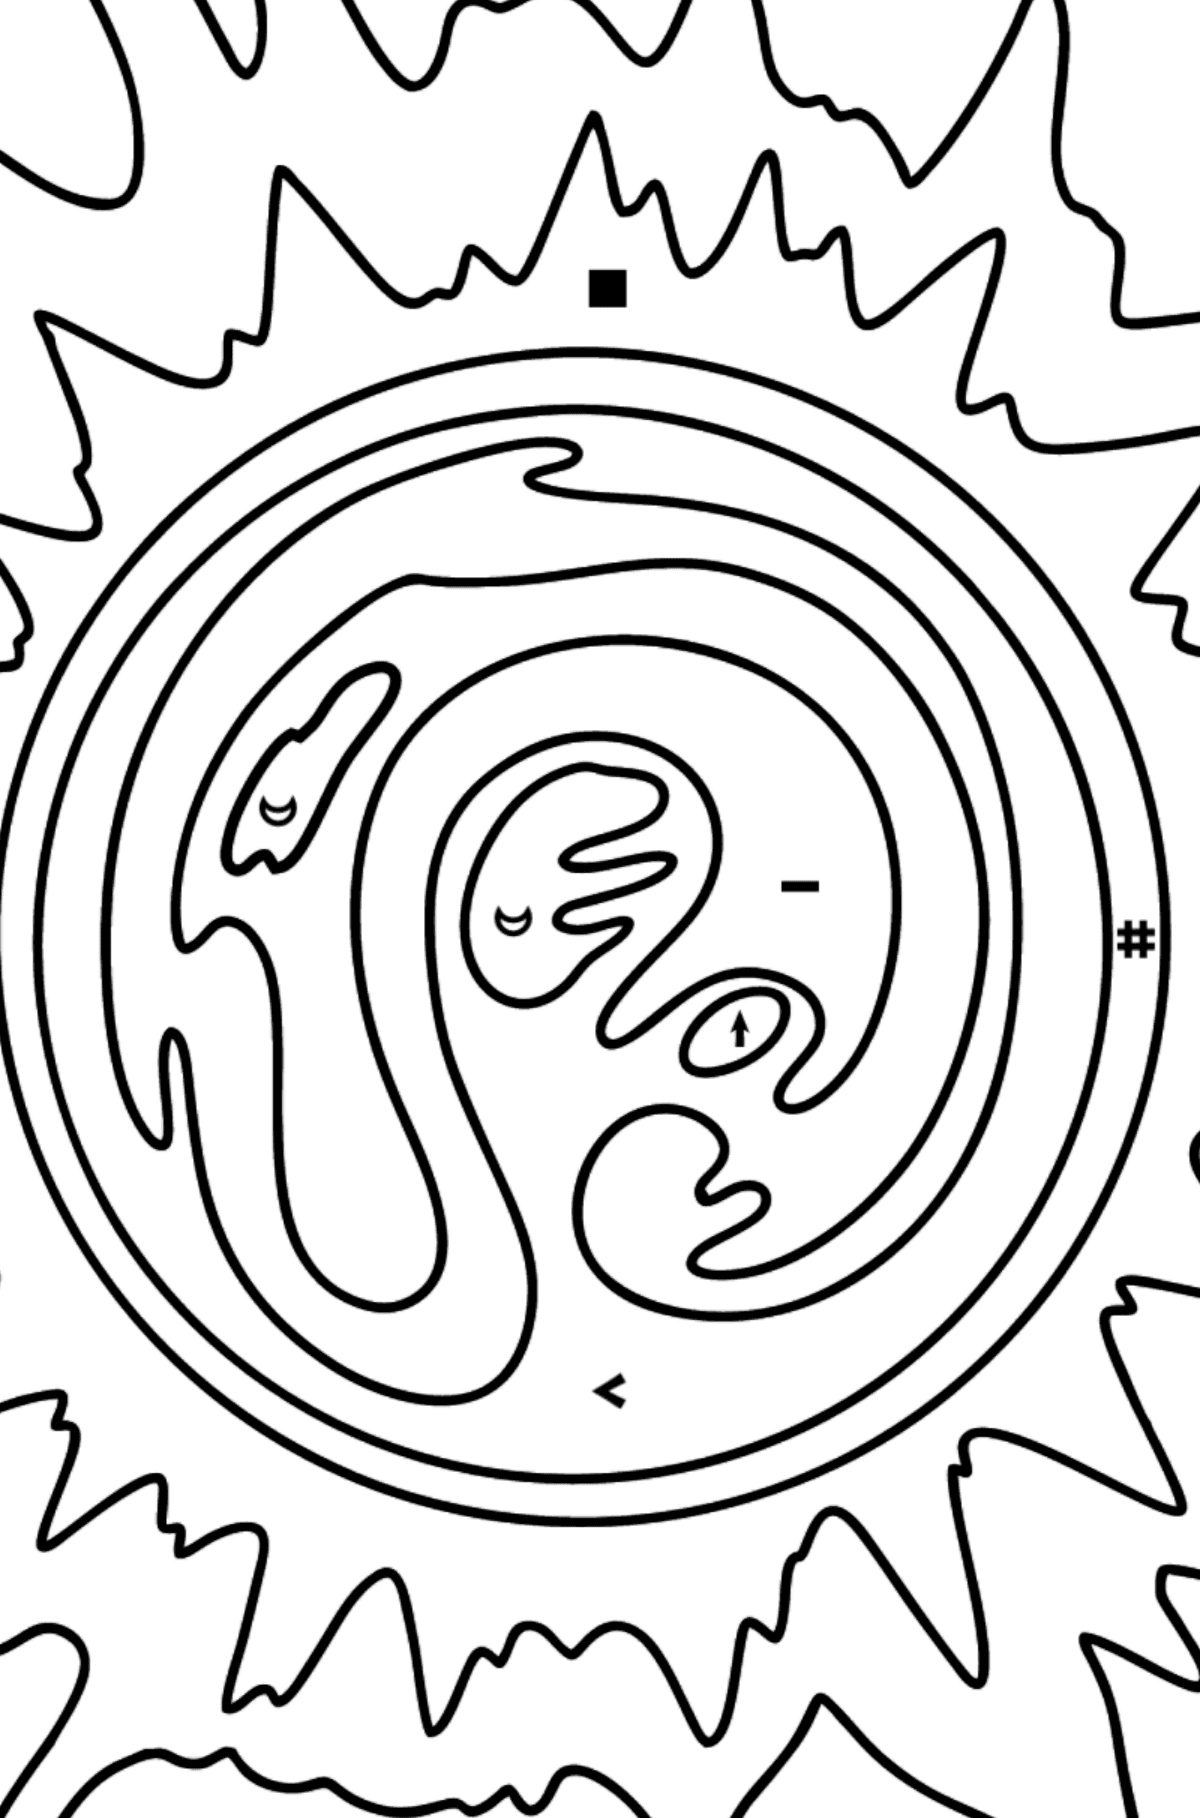 Sun coloring page - Coloring by Symbols for Kids